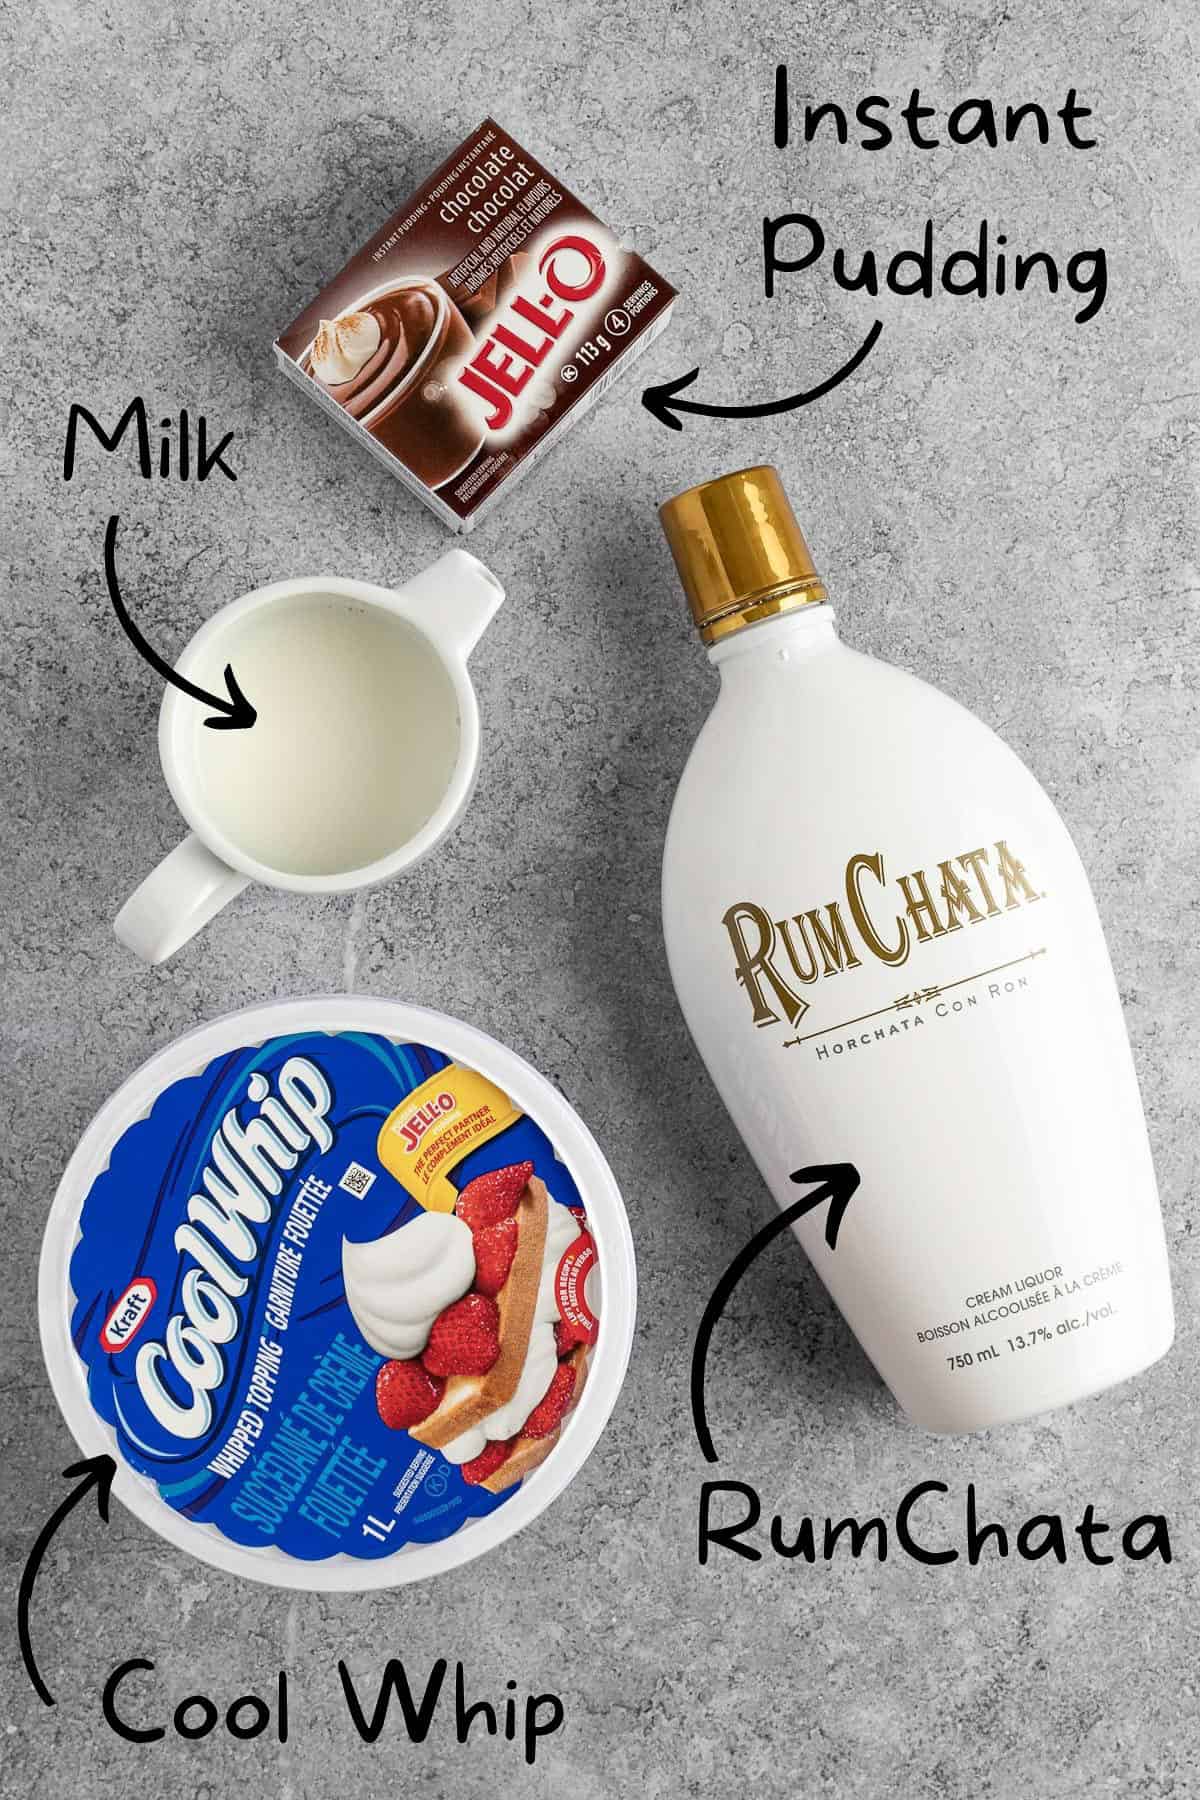 The ingredients needed to make the pudding shots.